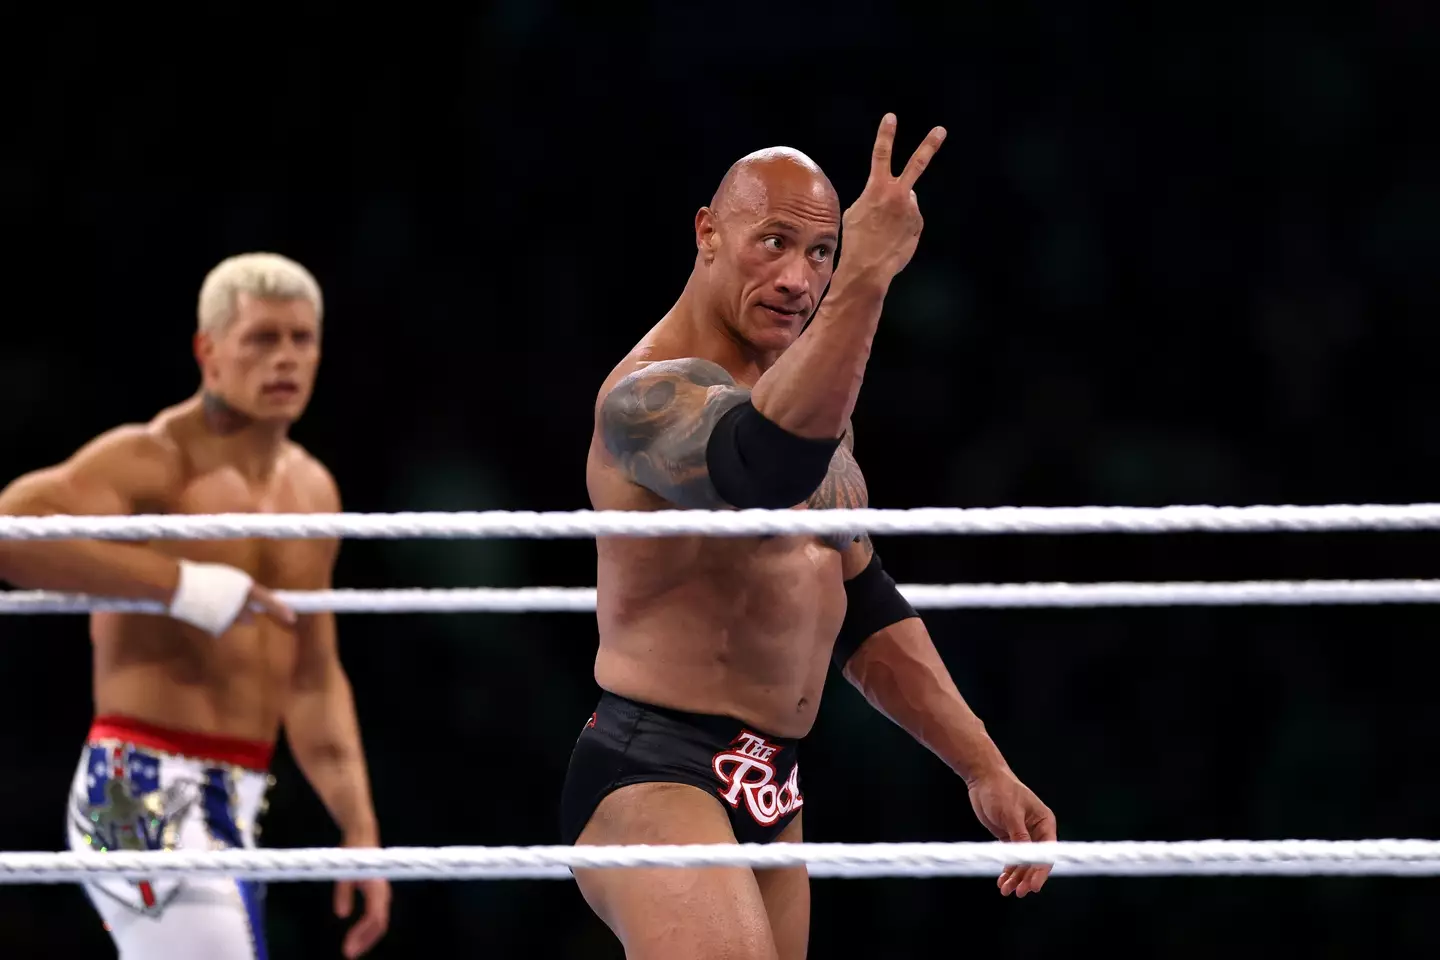 The Rock is back in the ring.